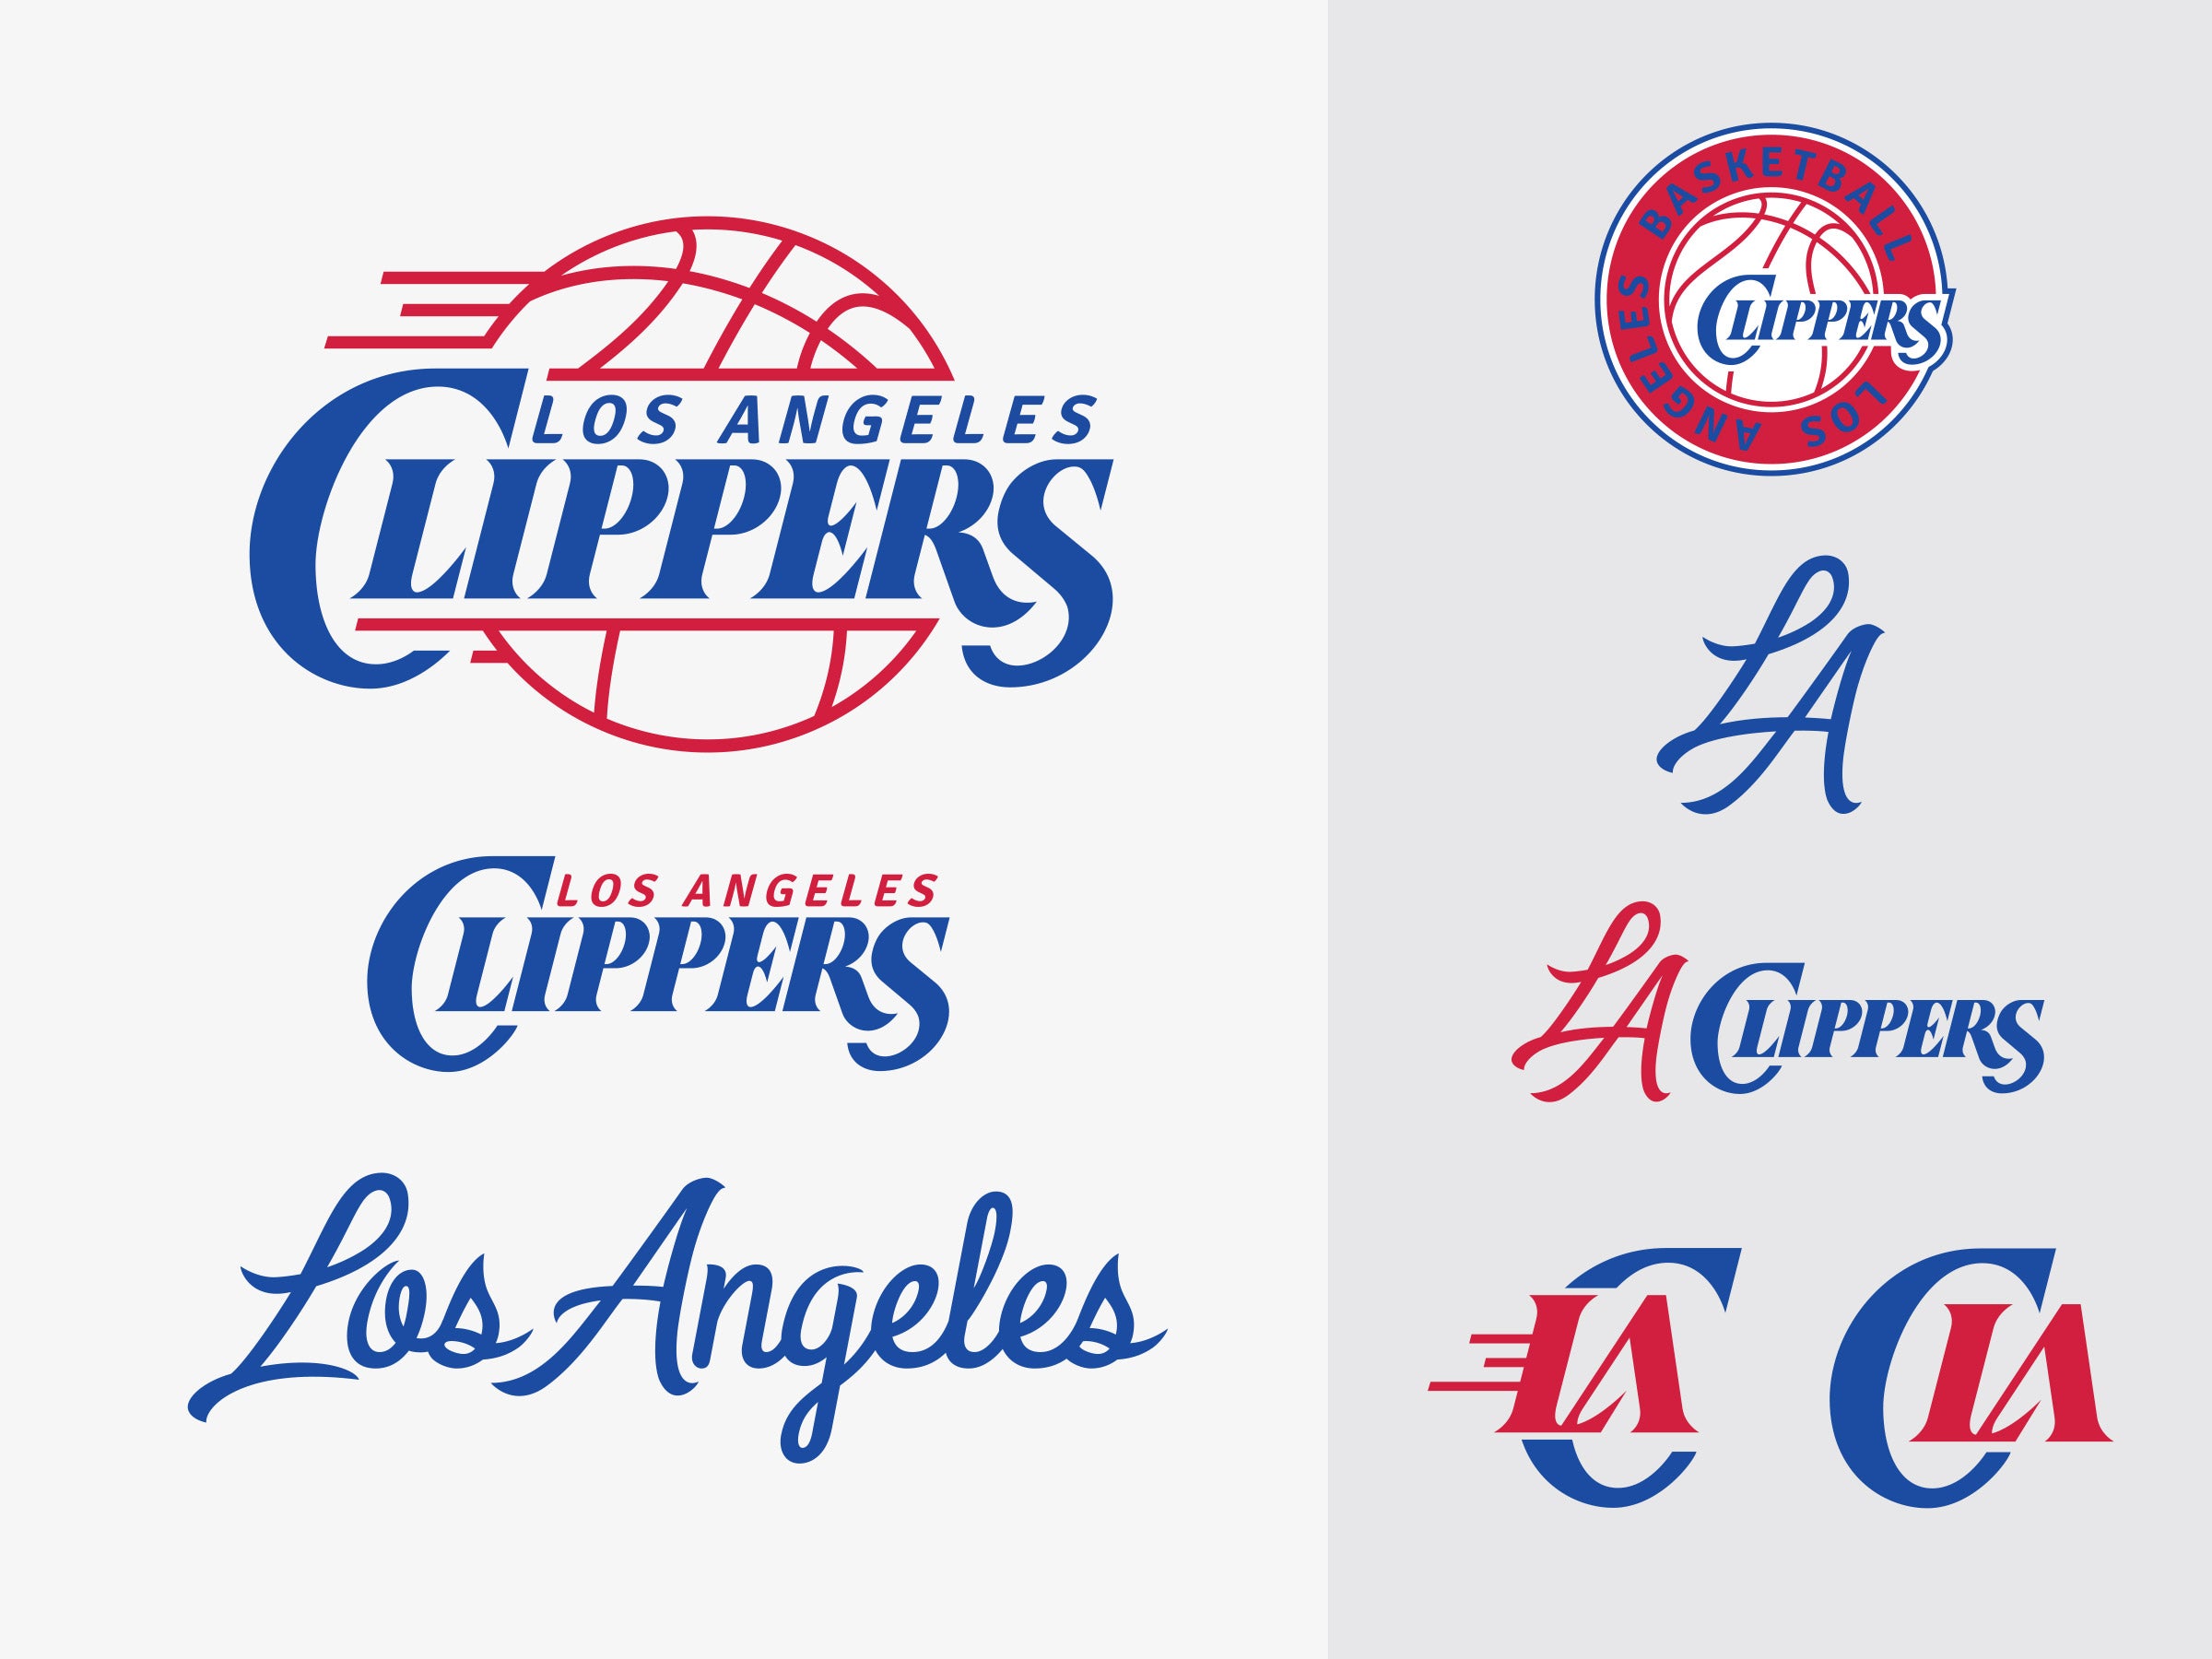 UNOFFICiAL ATHLETIC  Los Angeles Clippers Rebrand